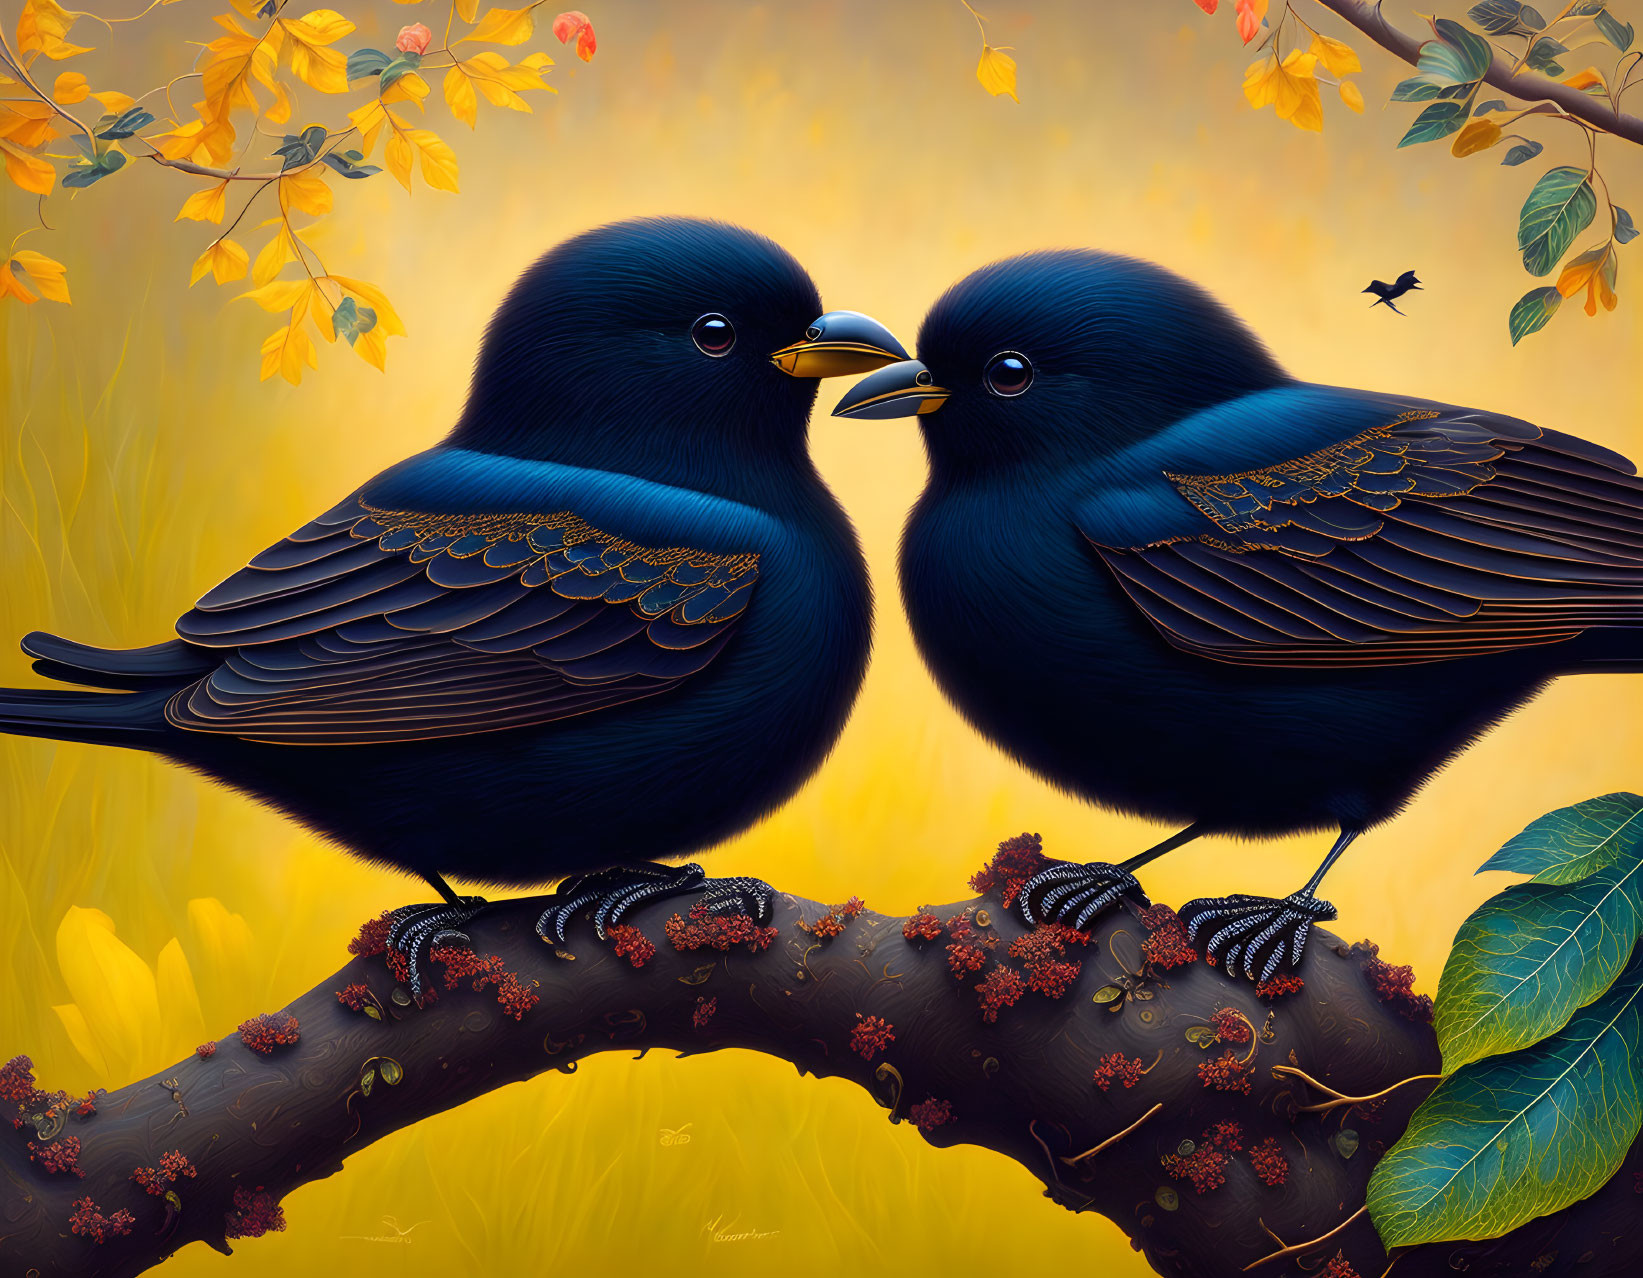 Stylized dark blue birds on branch with autumn leaves and red berries